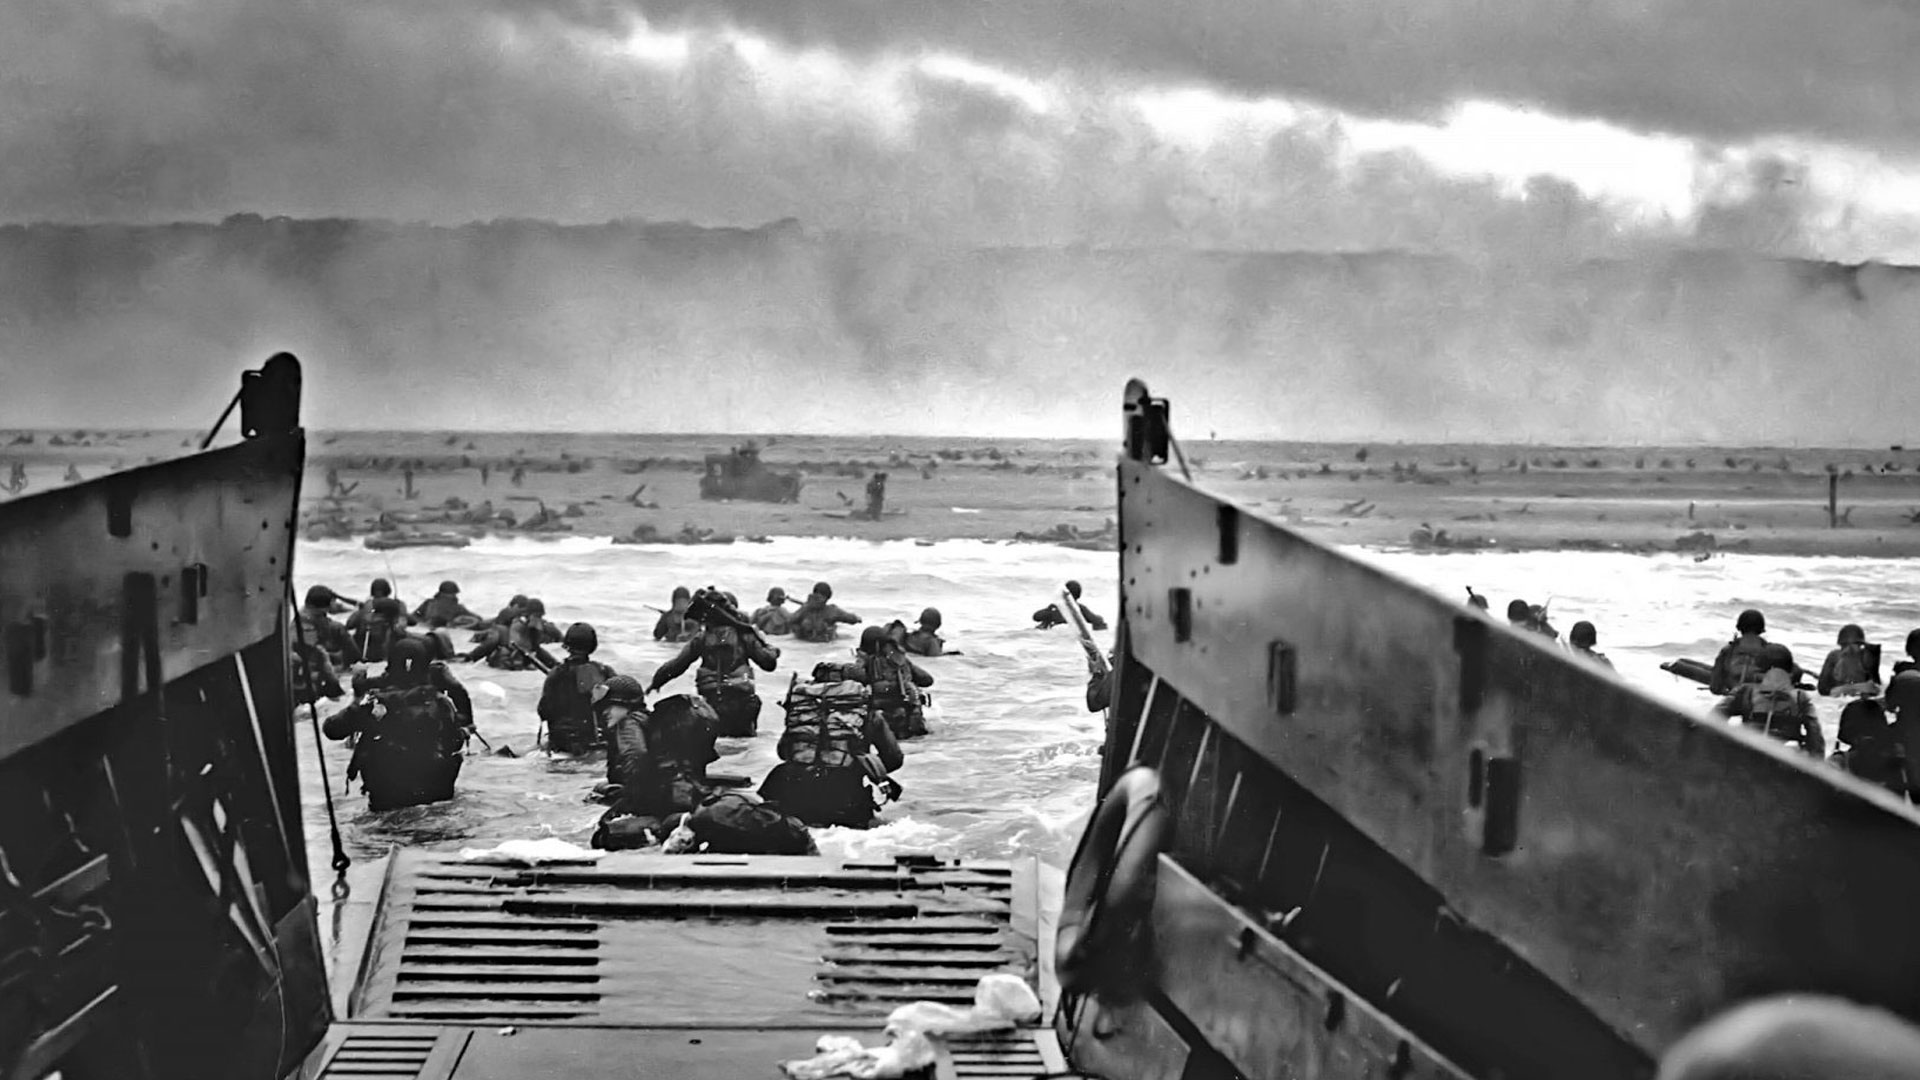 Image of U.S solders storming the beaches on D-Day on June 6th 1944